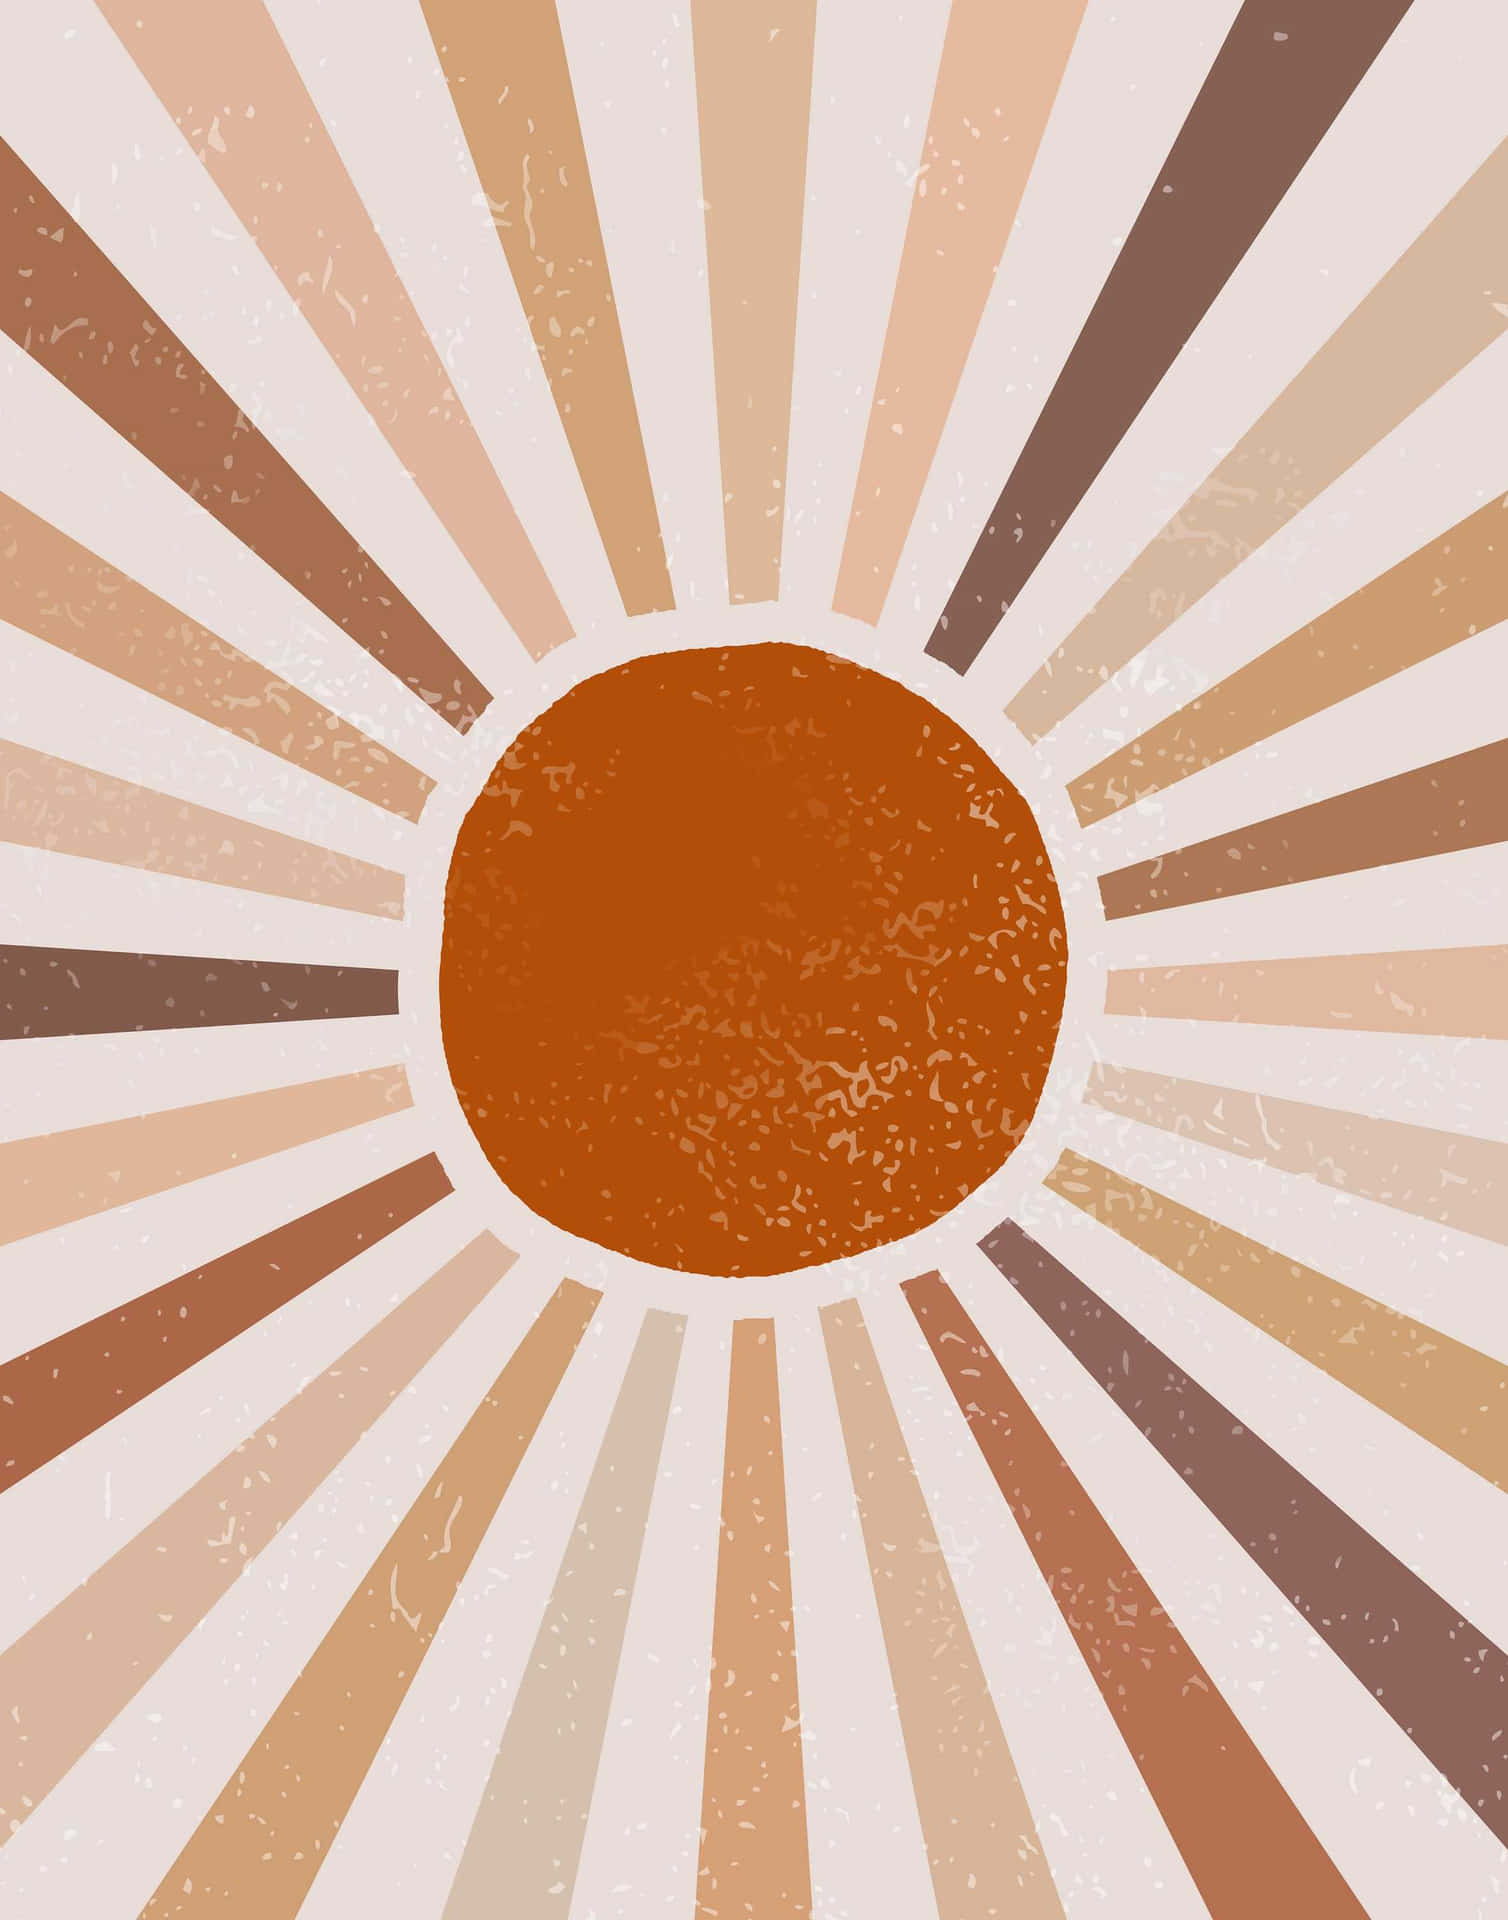 A Sunburst With A Brown And Beige Background